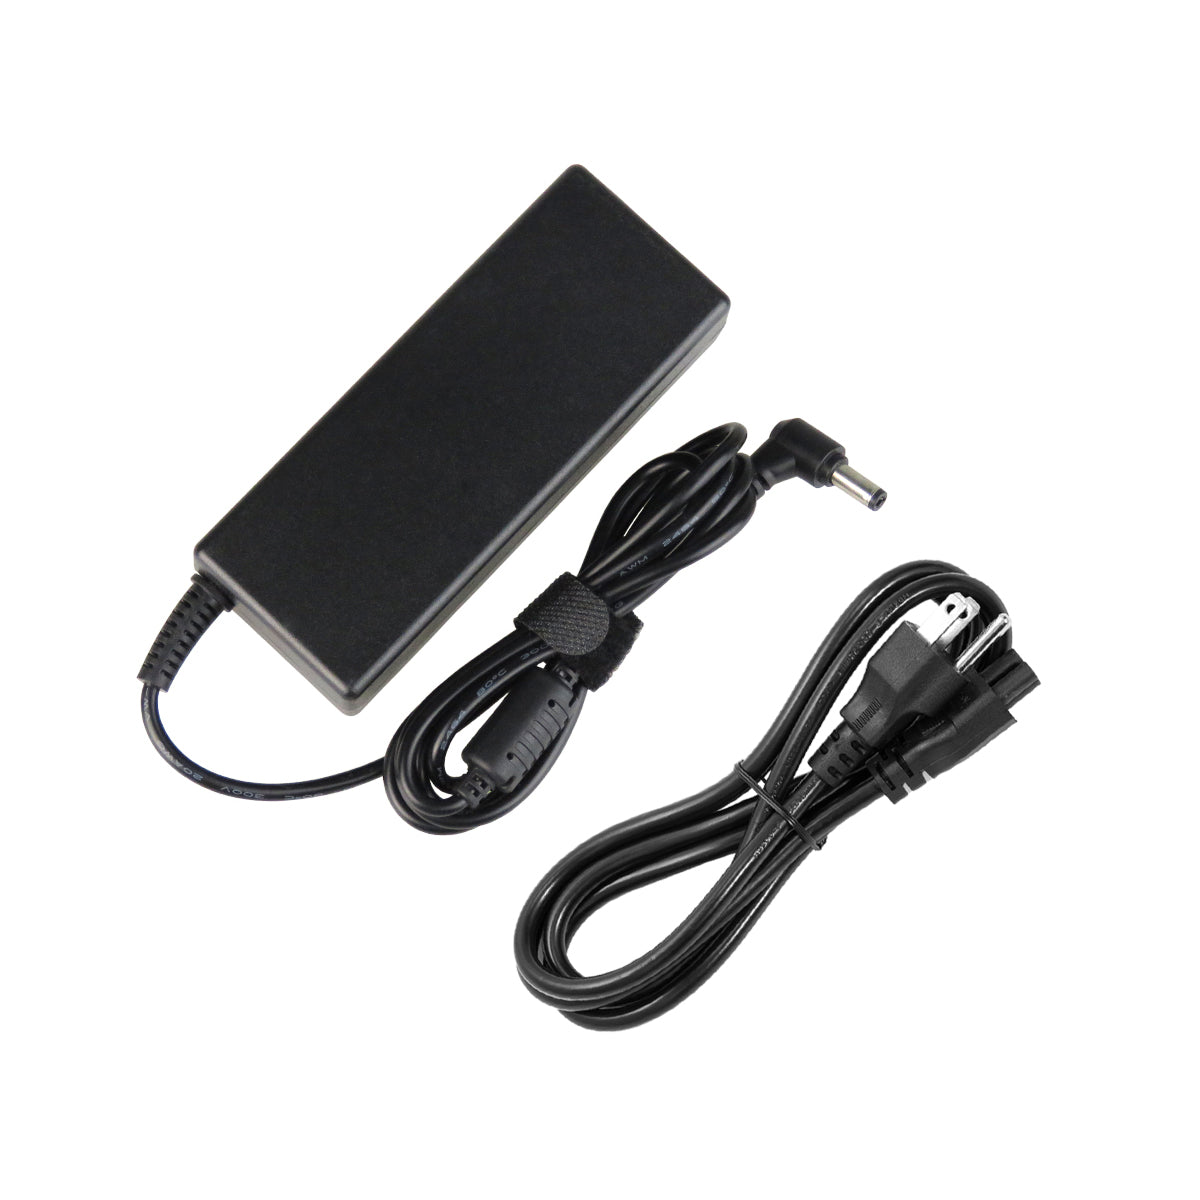 AC Adapter Charger for ASUS N80VB Notebook.